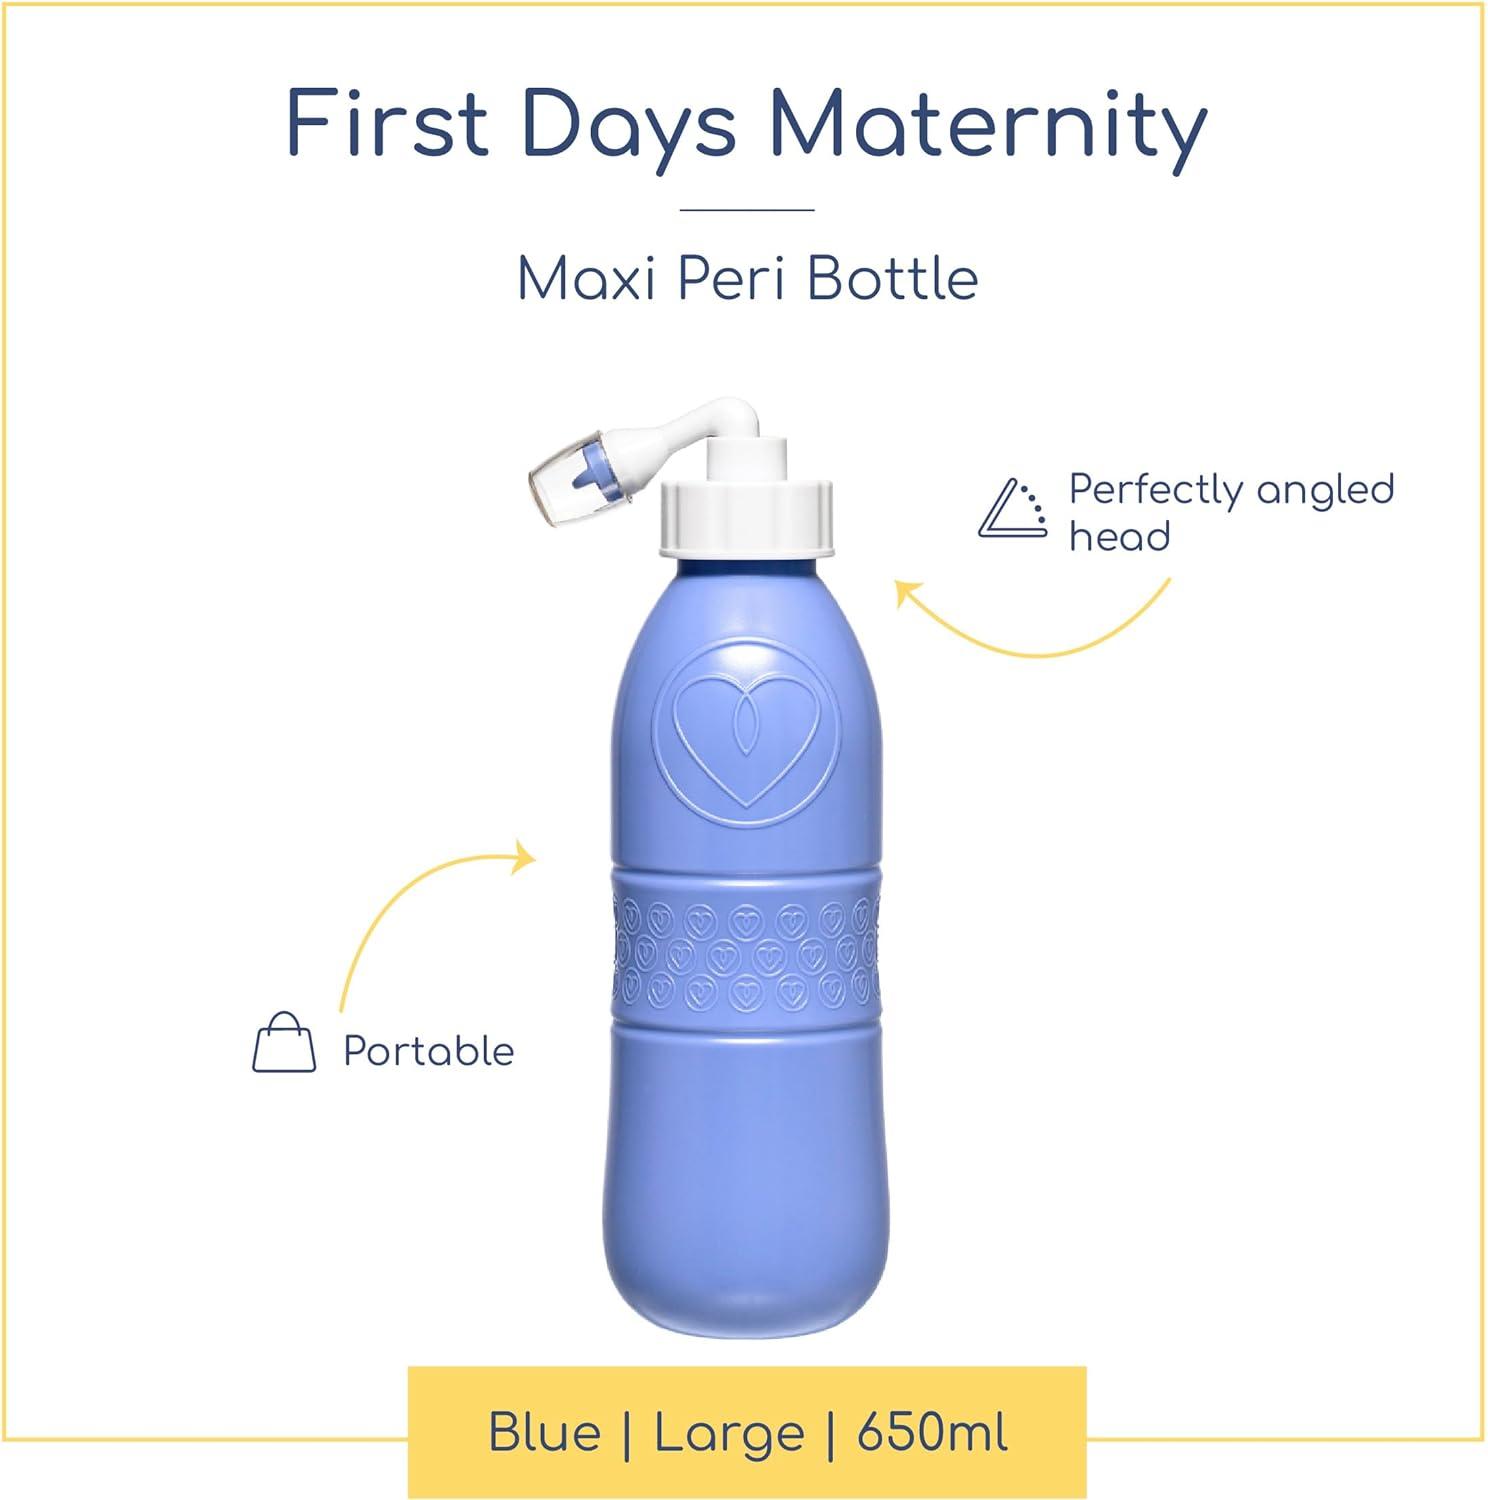 First Days Maternity - Maxi Peri Bottle, Portable Peri Bottle for Maximum  Postpartum Soothing, Perfectly Angled Head, Versatile, Durable, BPA-Free